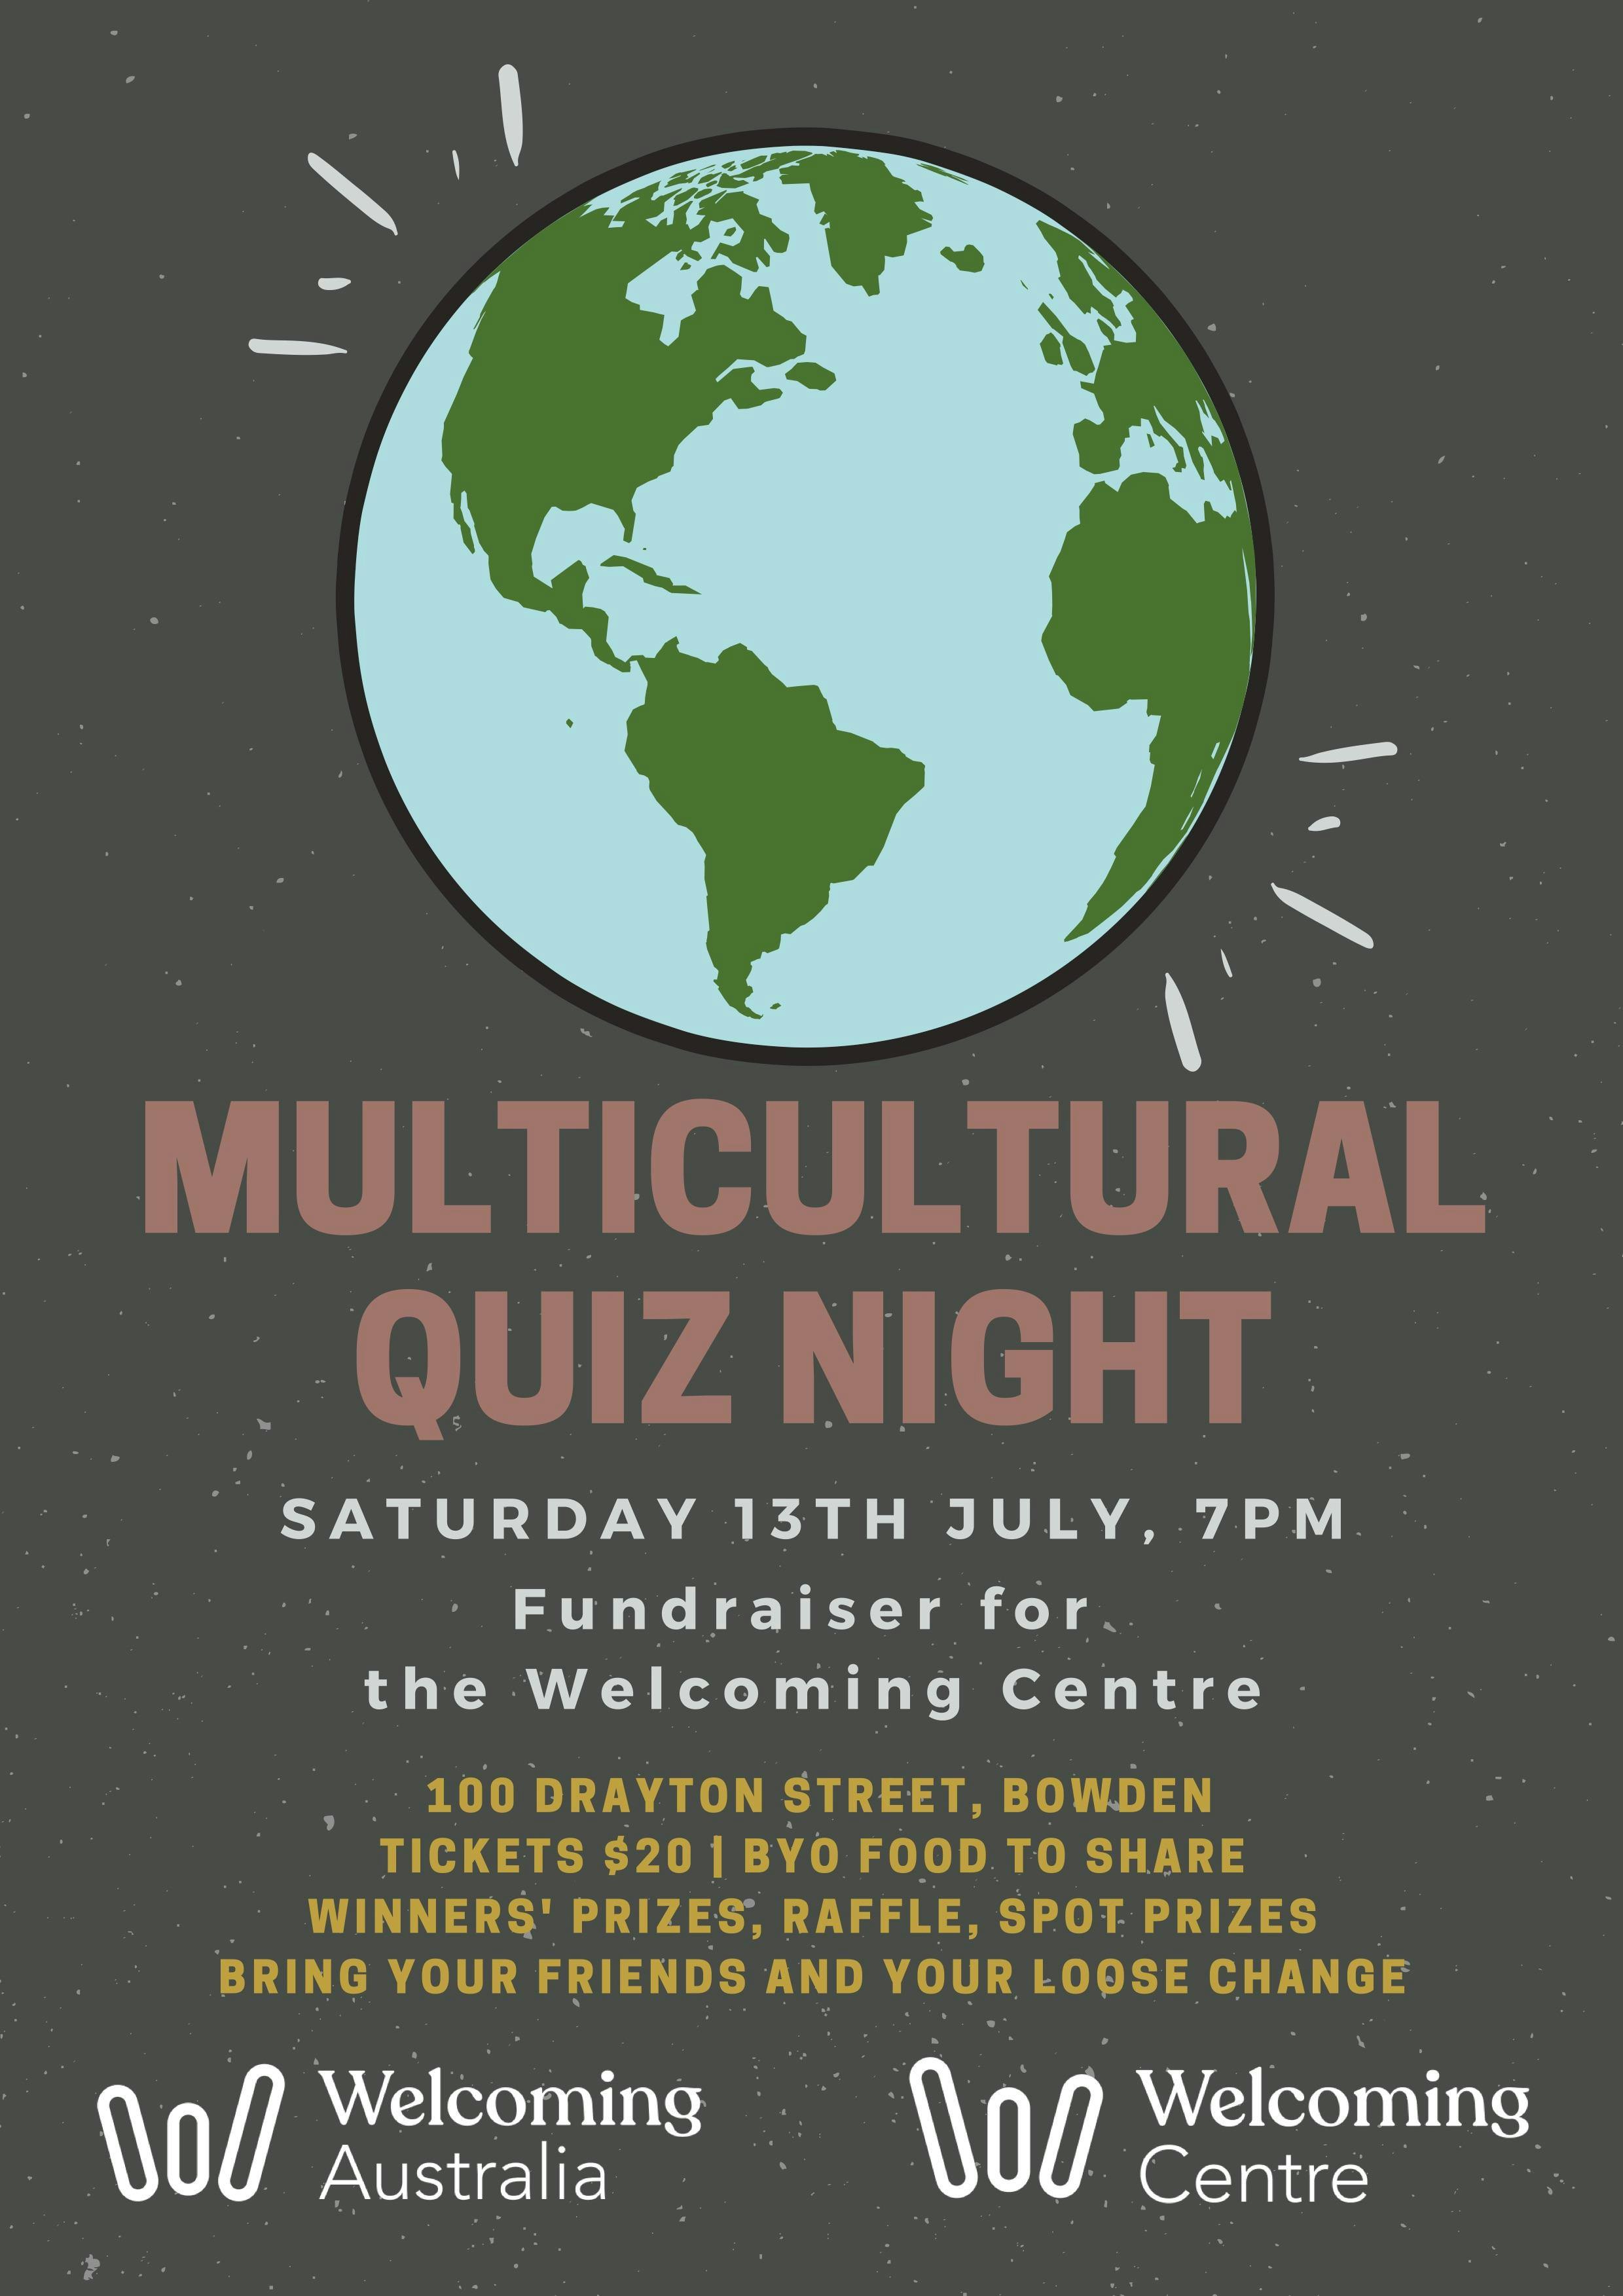 Multicultural Quiz Night for the Welcoming Centre